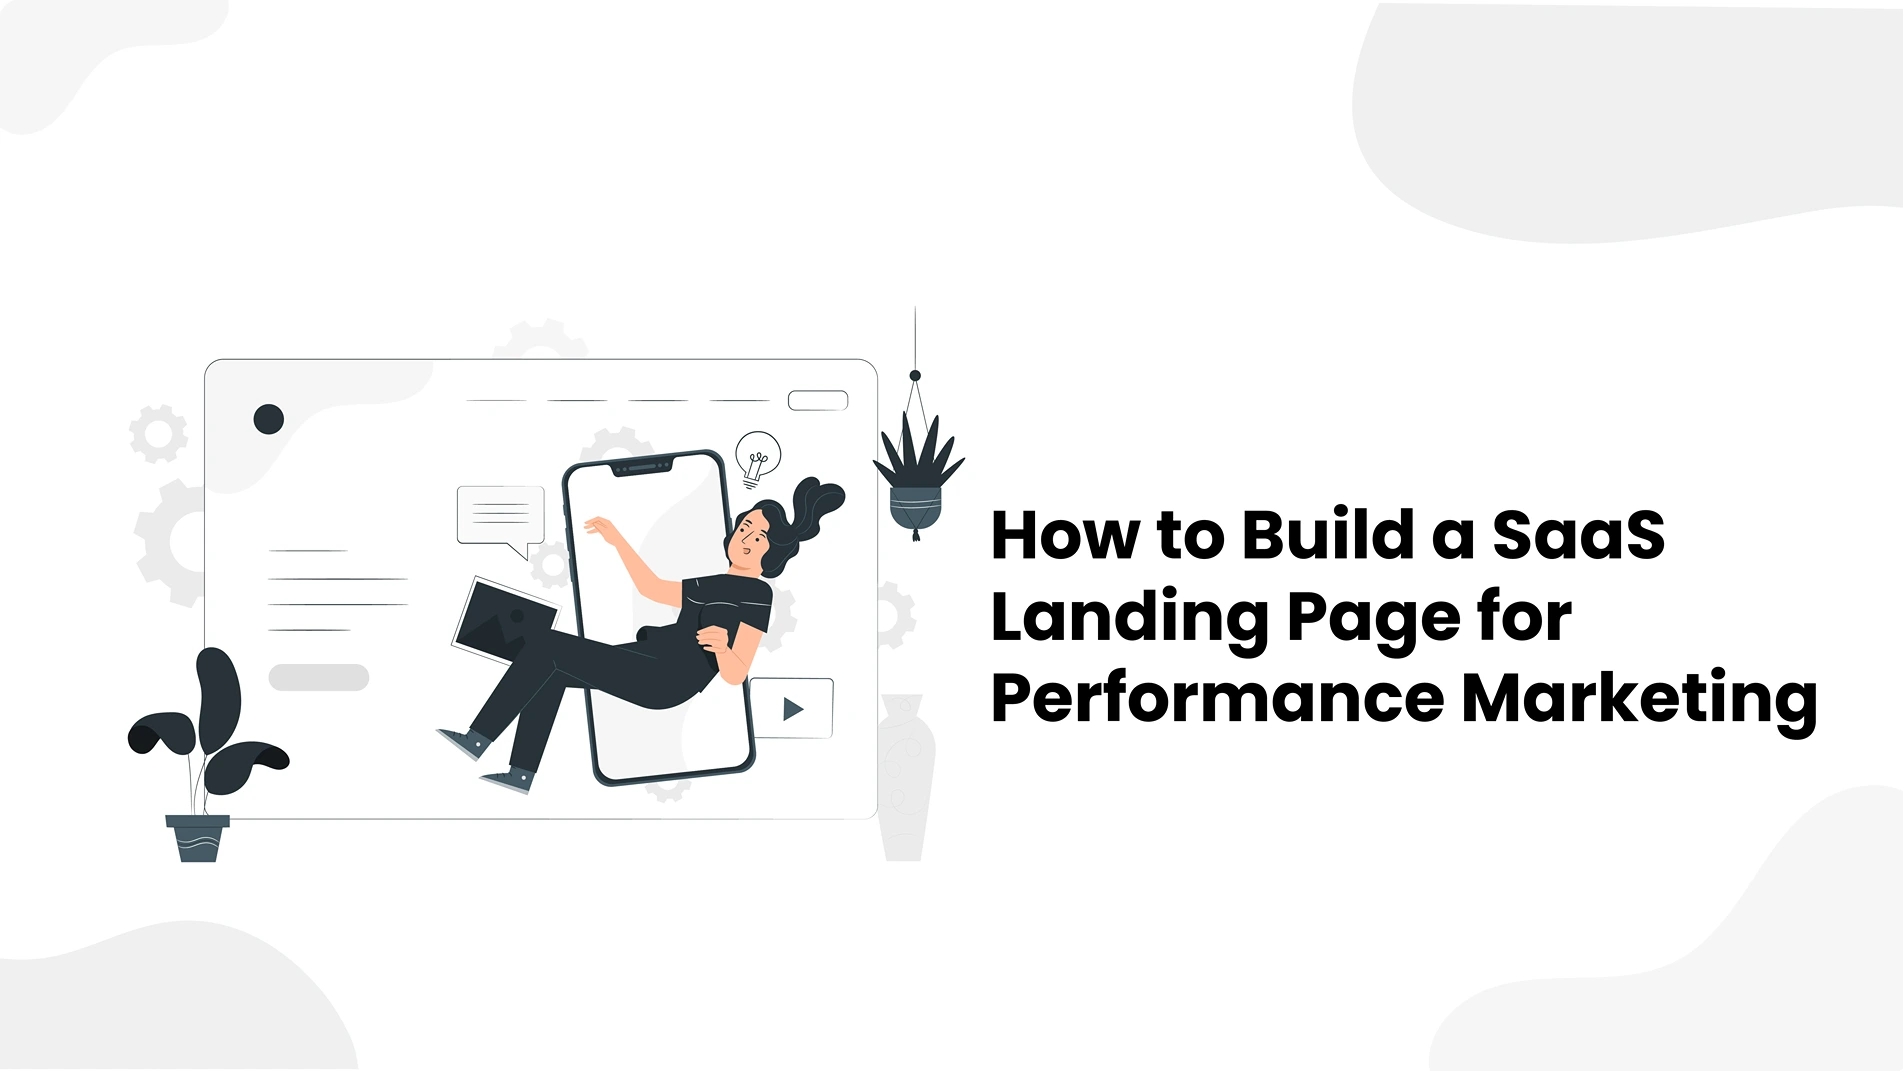 How to Build a SaaS Landing Page for Performance Marketing